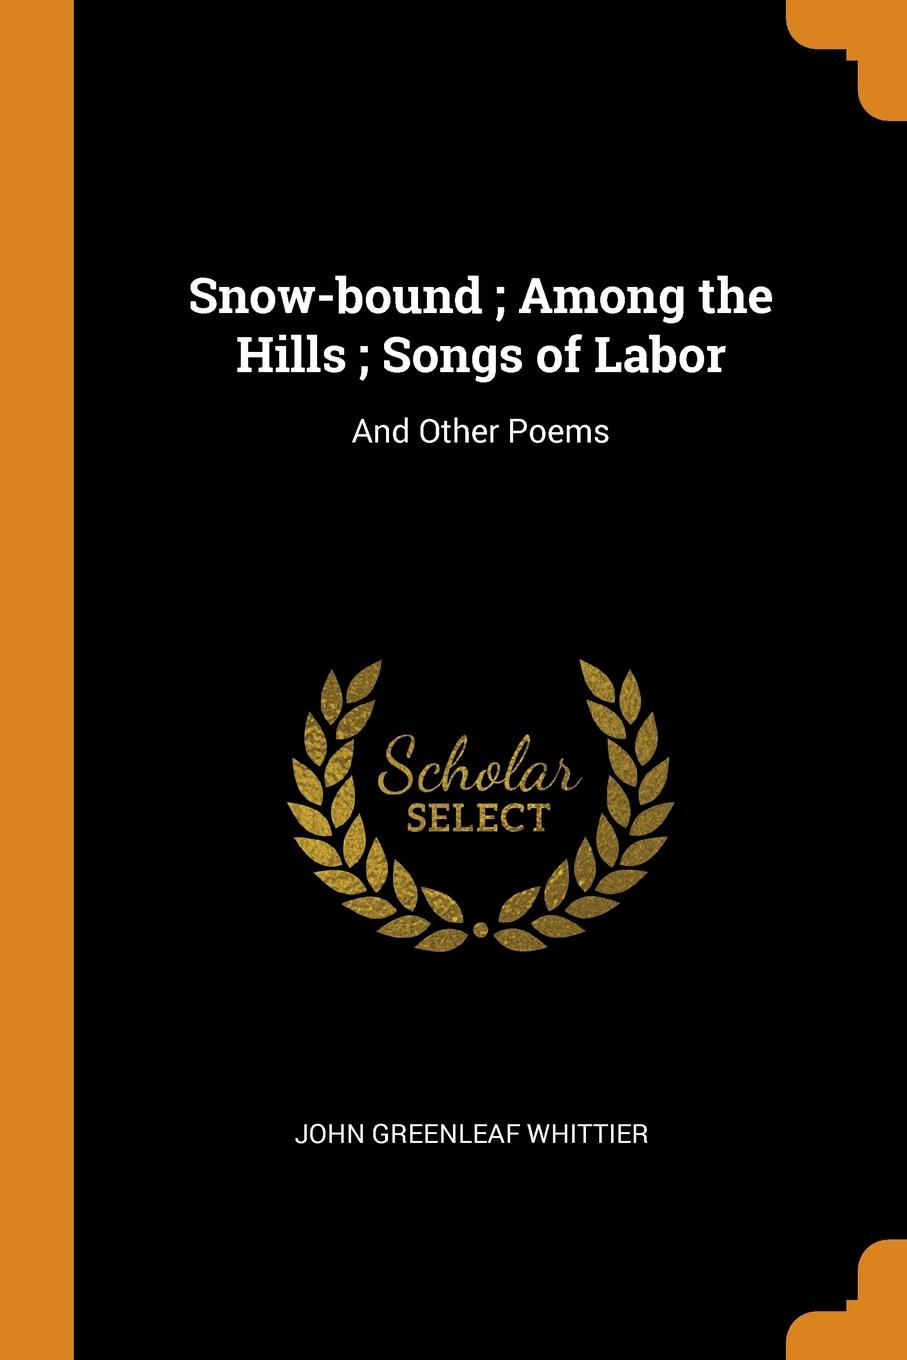 Snow-bound ; Among the Hills ; Songs of Labor. And Other Poems